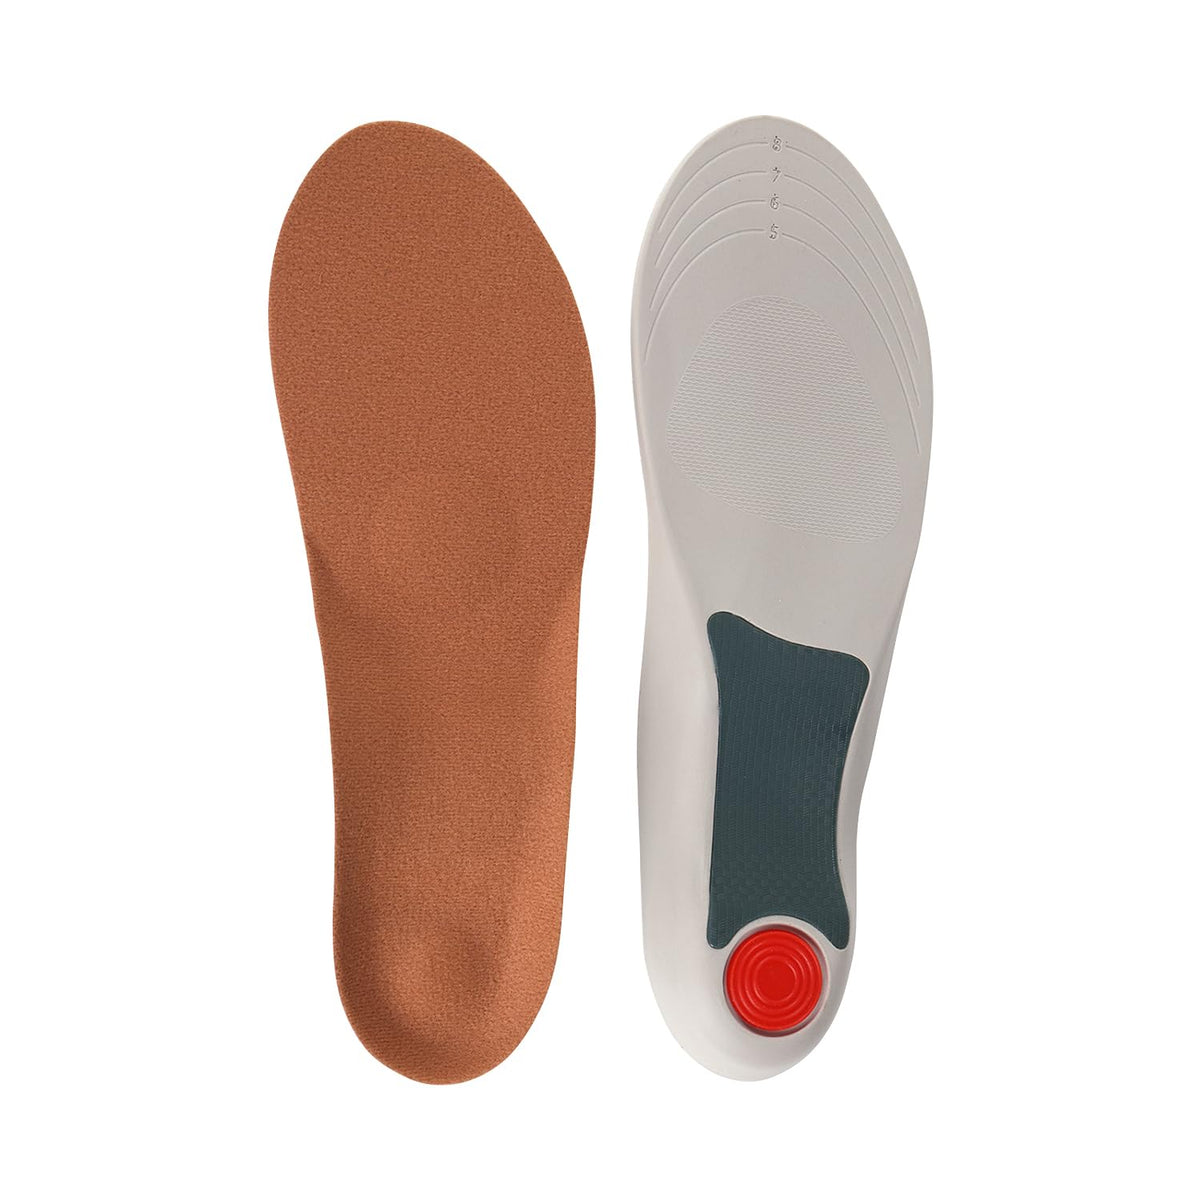 Dr Foot Orthotics for Lower Back Pain Insoles | For Lower Back Pain, Arch Support |Shock Absorbing |Relief - Alleviate Discomfort in the Lower Back | For Men & Women - 1 Pair - (Medium Size)